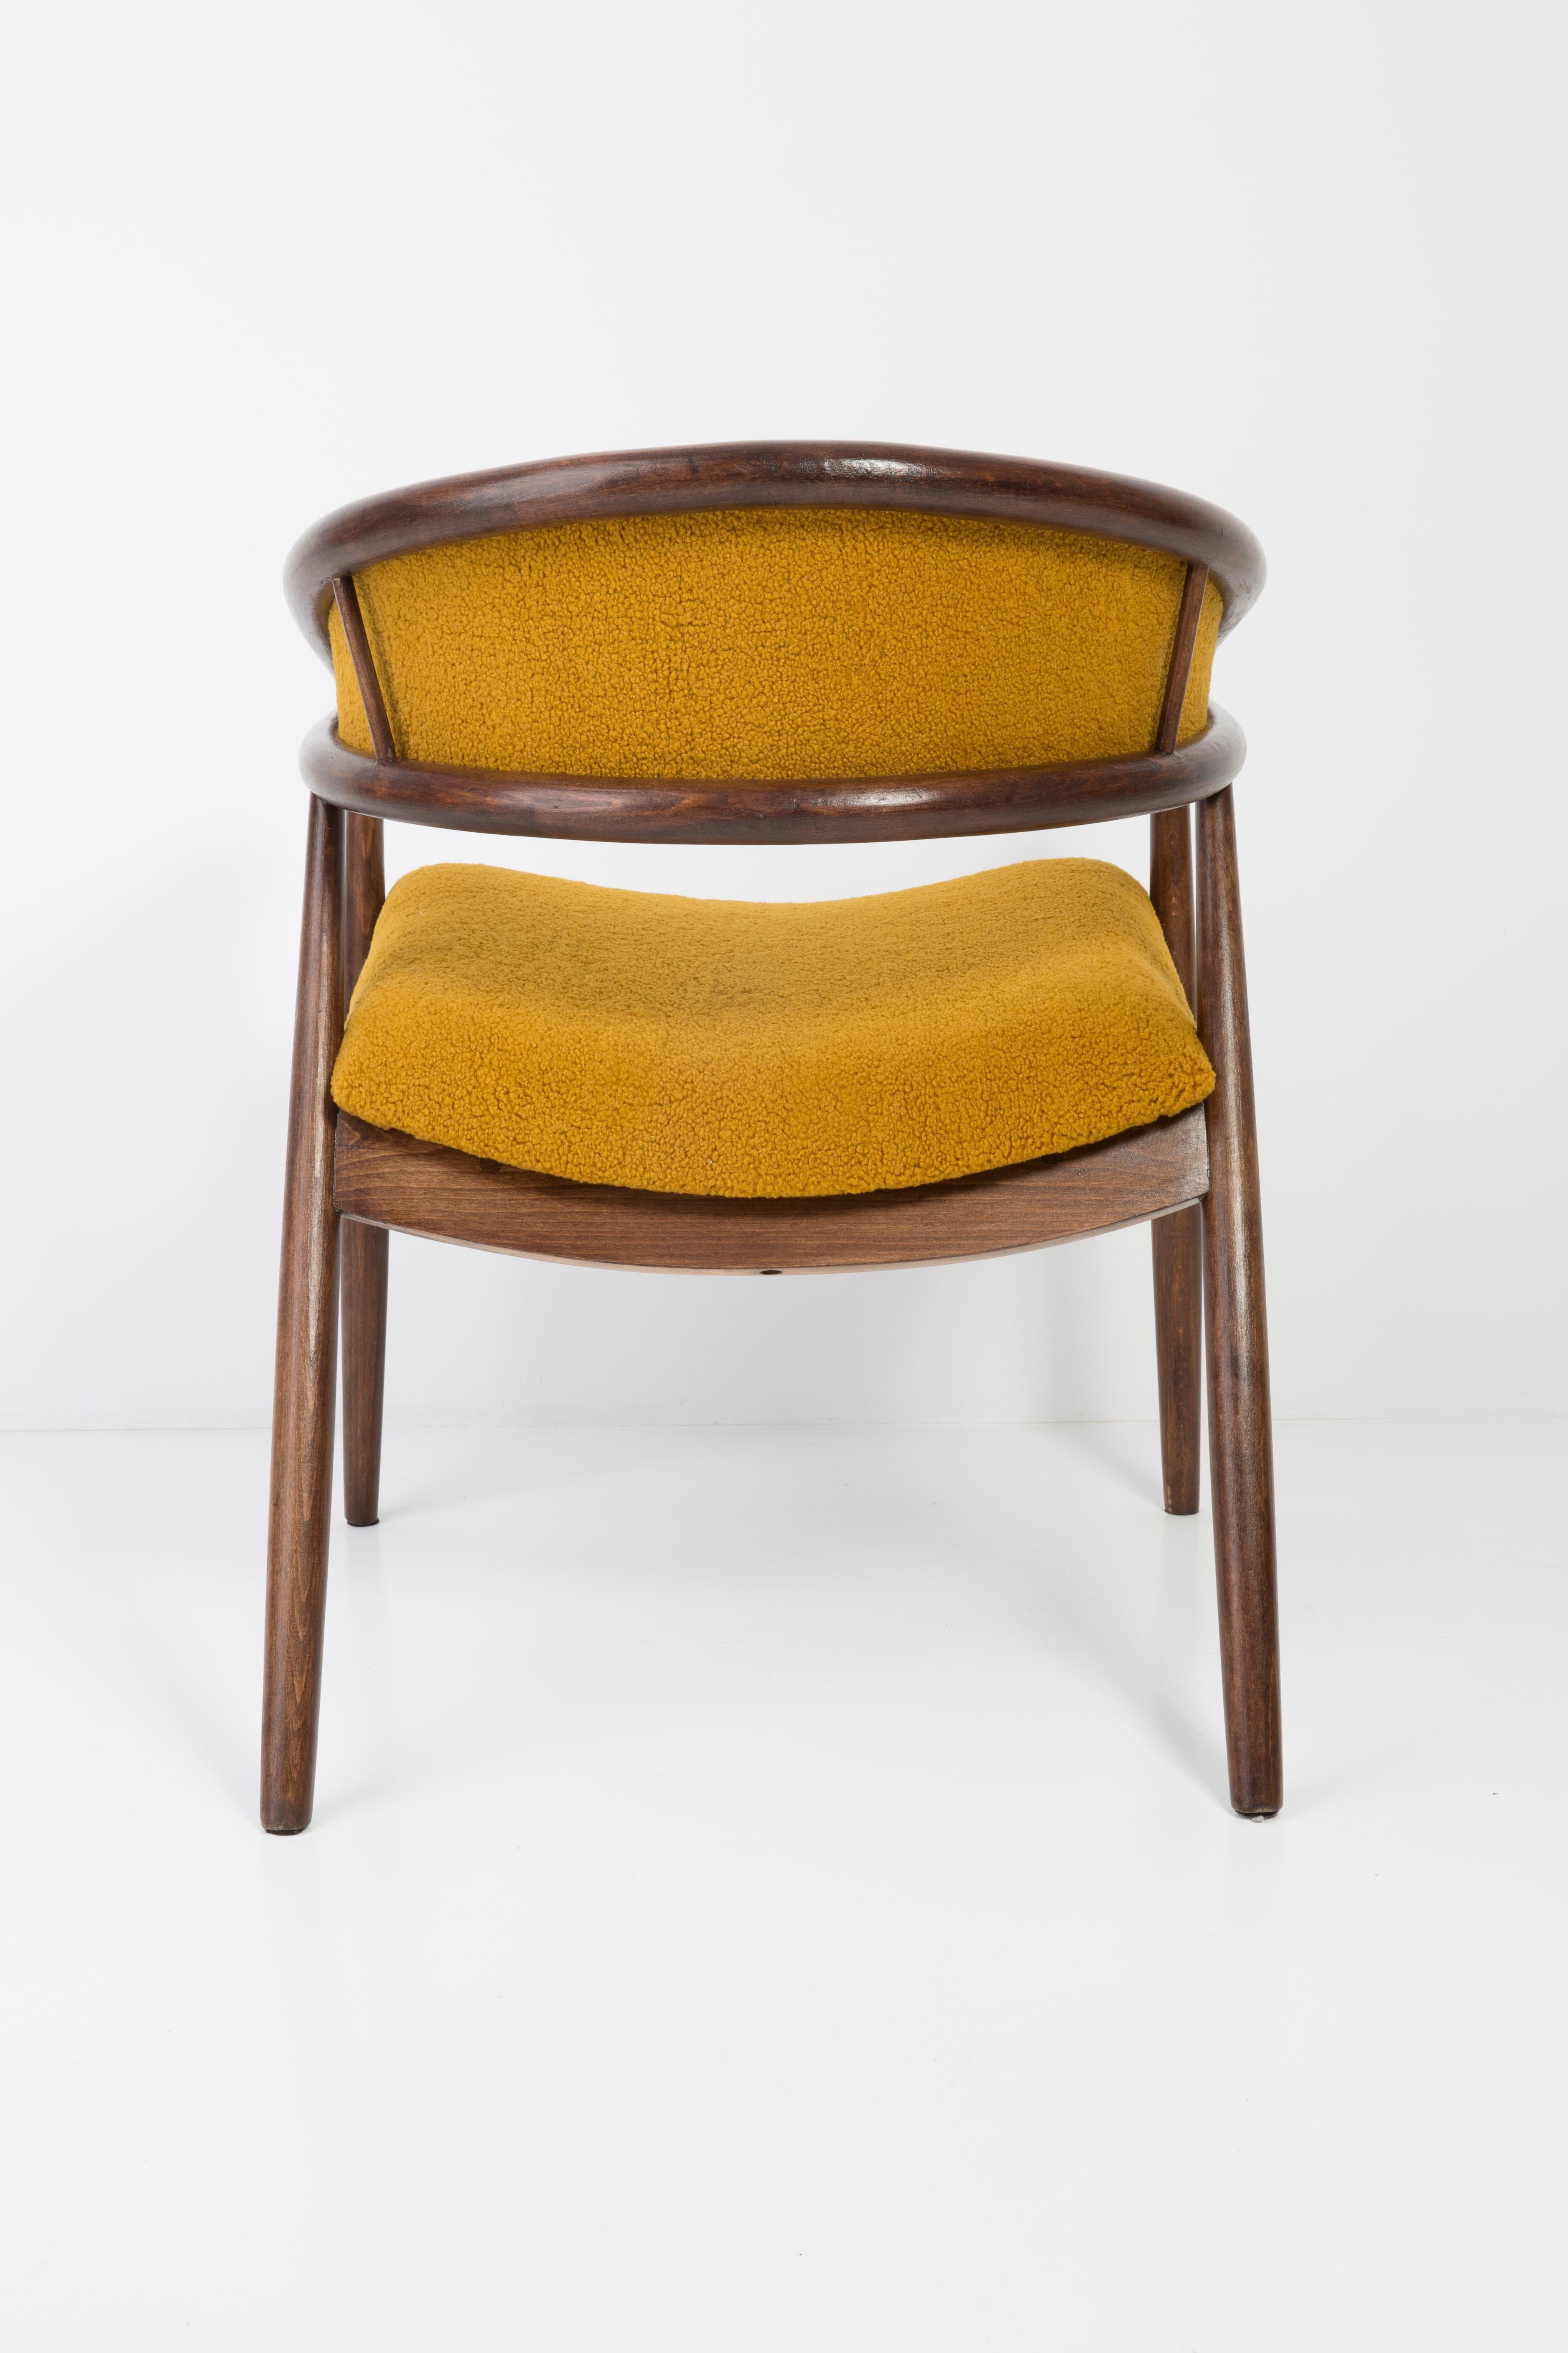 Set of James Mont Bent Beech Armchairs and Table, Yellow Ochra Boucle, 1960s For Sale 6